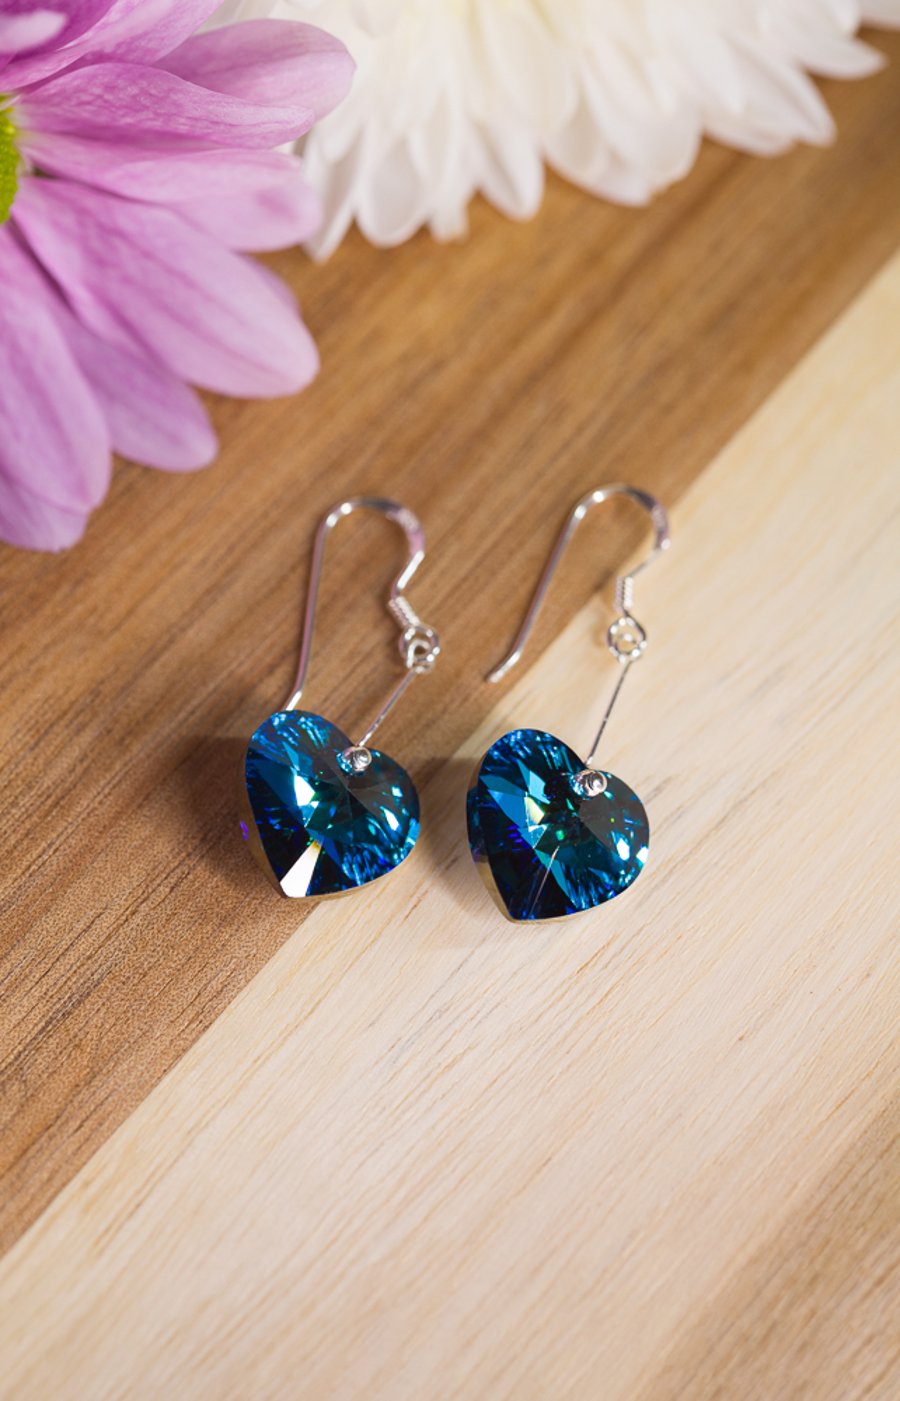 Earrings Sterling Silver and sparkly Bermuda Blue Swarovski hearts 